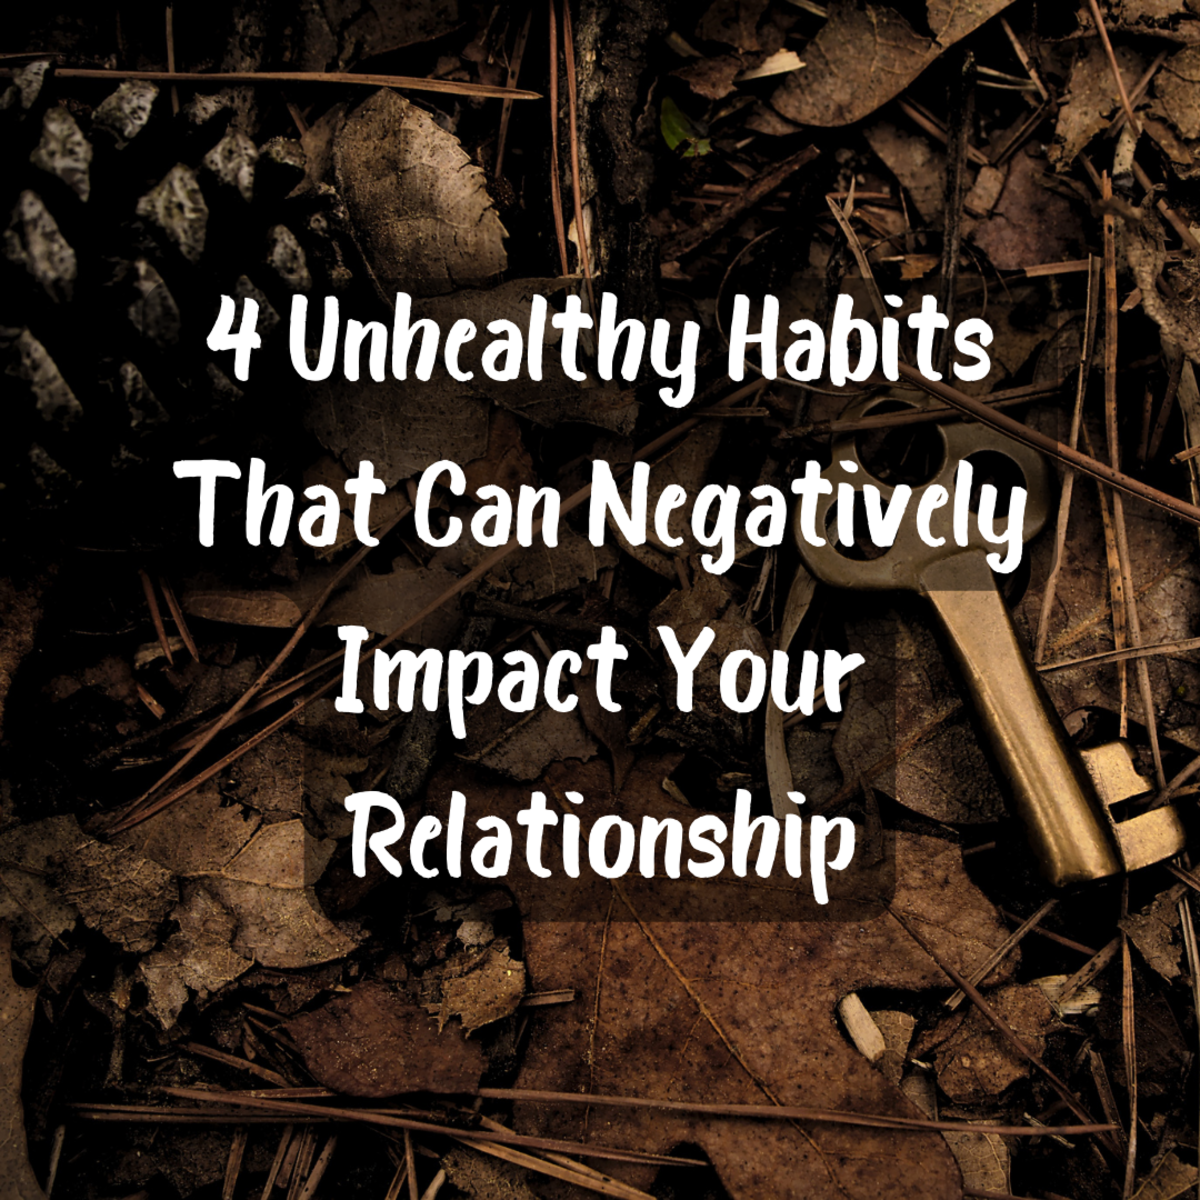 Learn about four unhealthy habits that might be negatively impacting your relationship.